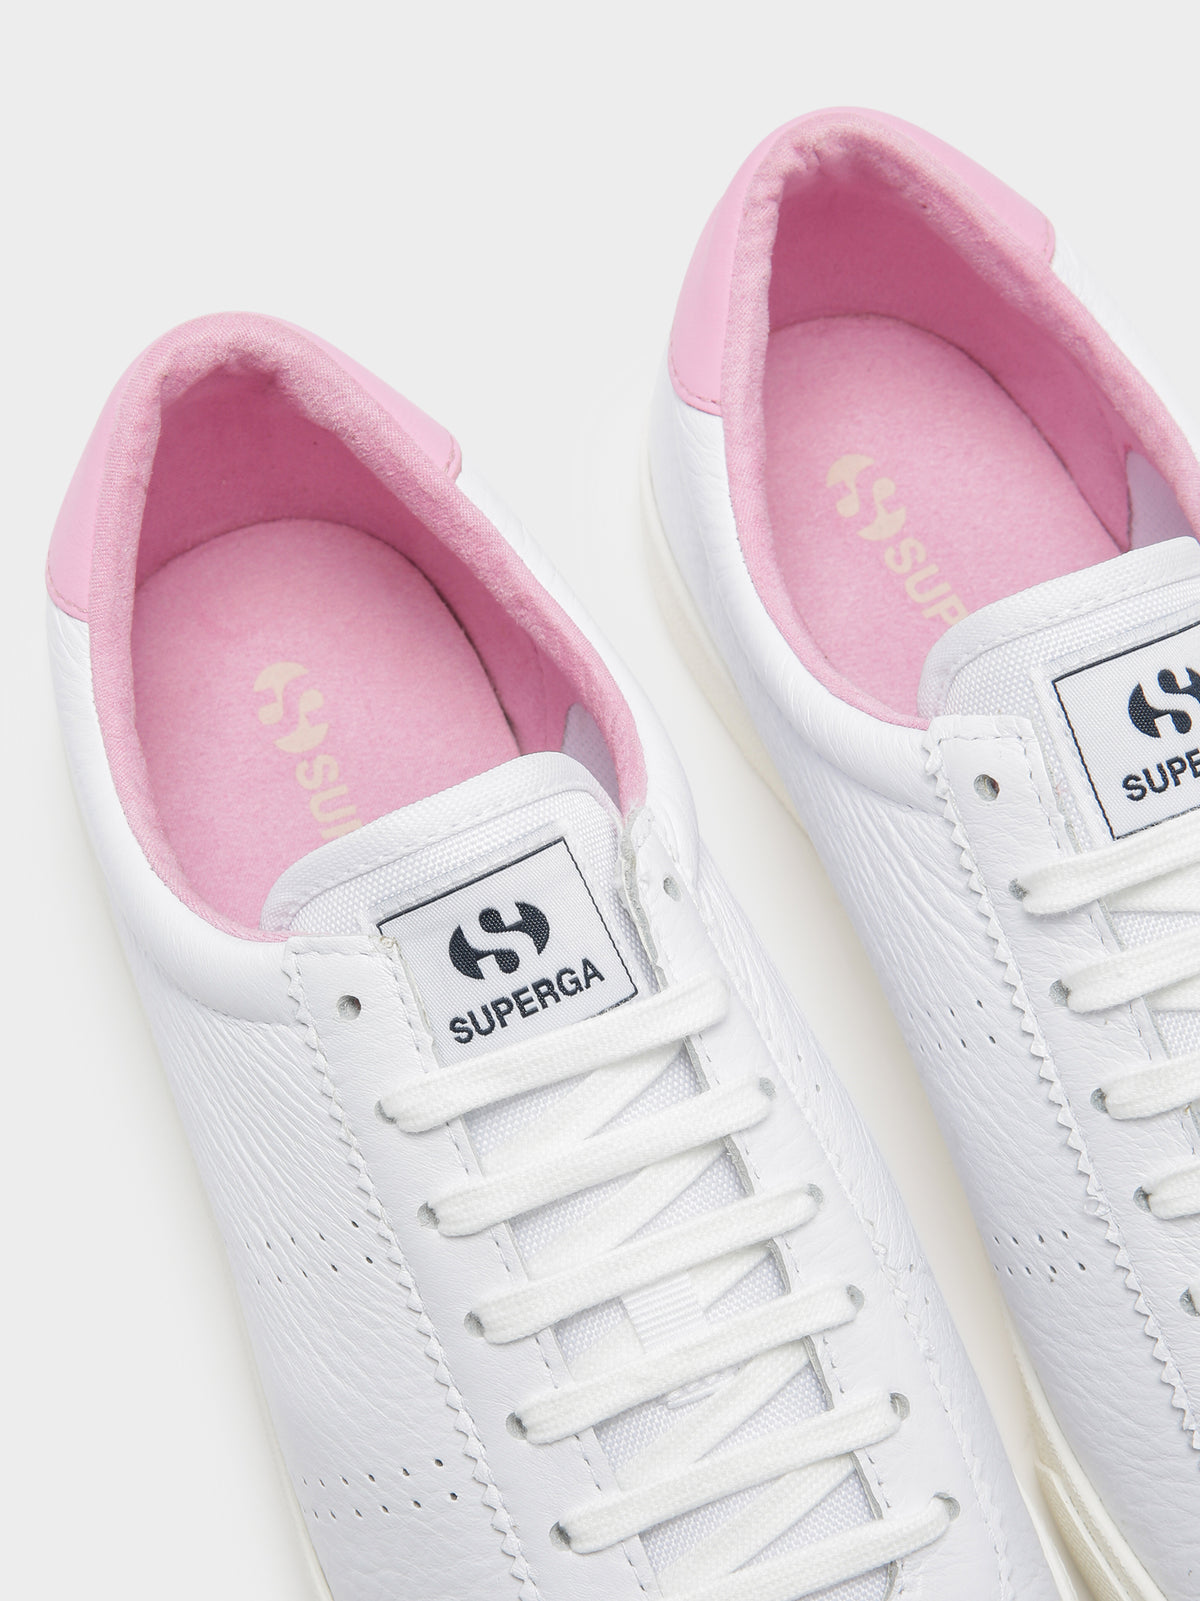 Unisex 2843 Club S Comfleau Sneakers in White &amp; Pink